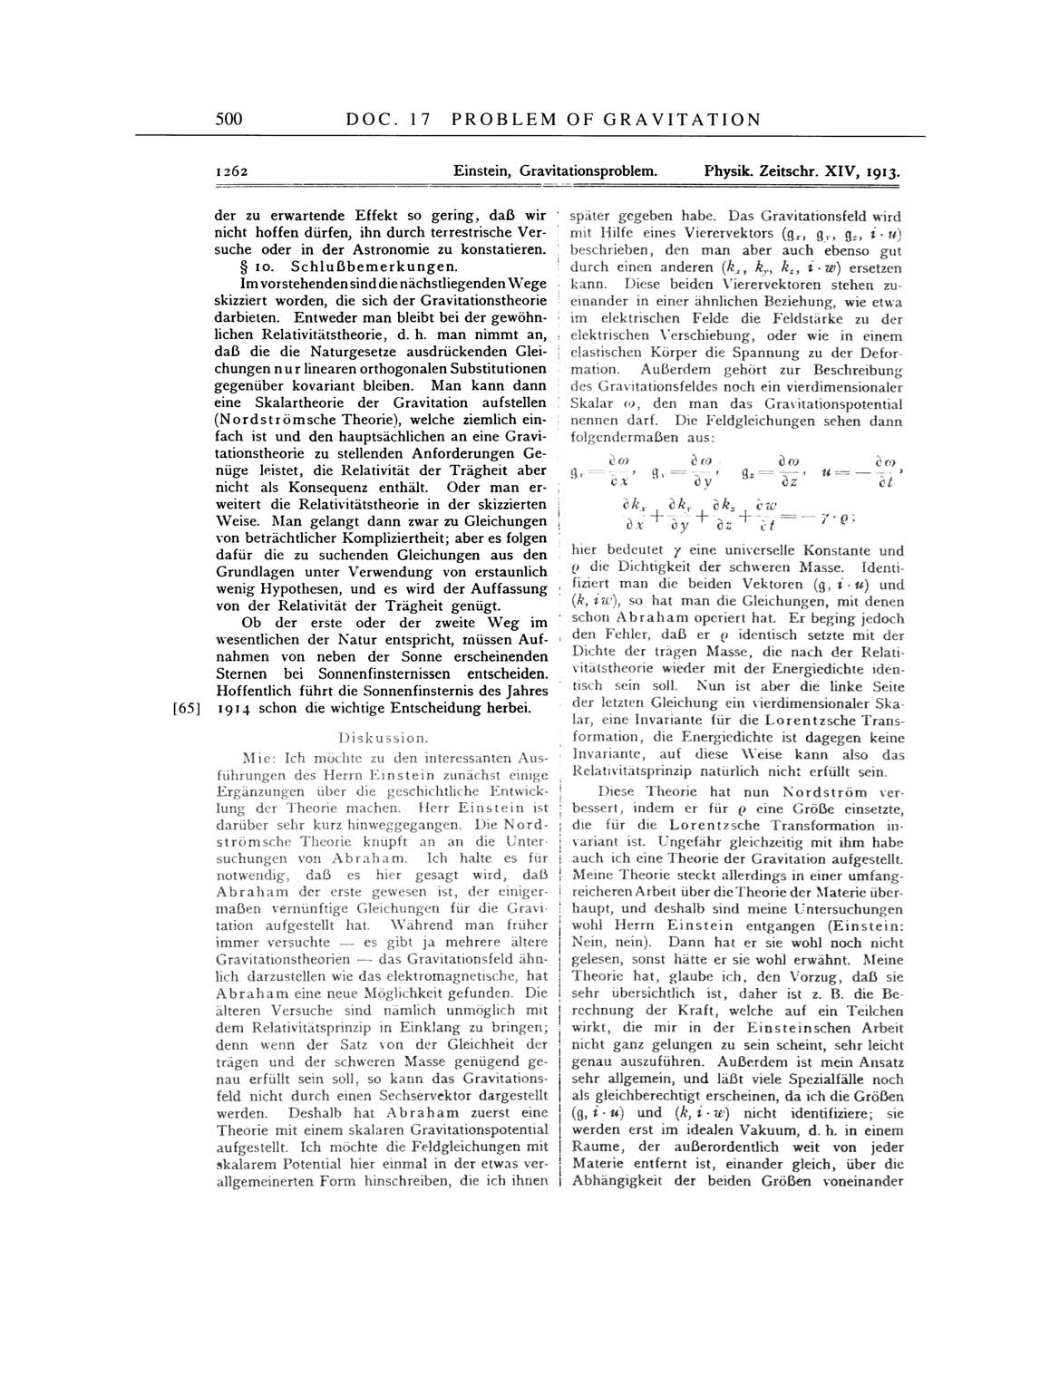 Volume 4: The Swiss Years: Writings 1912-1914 page 500